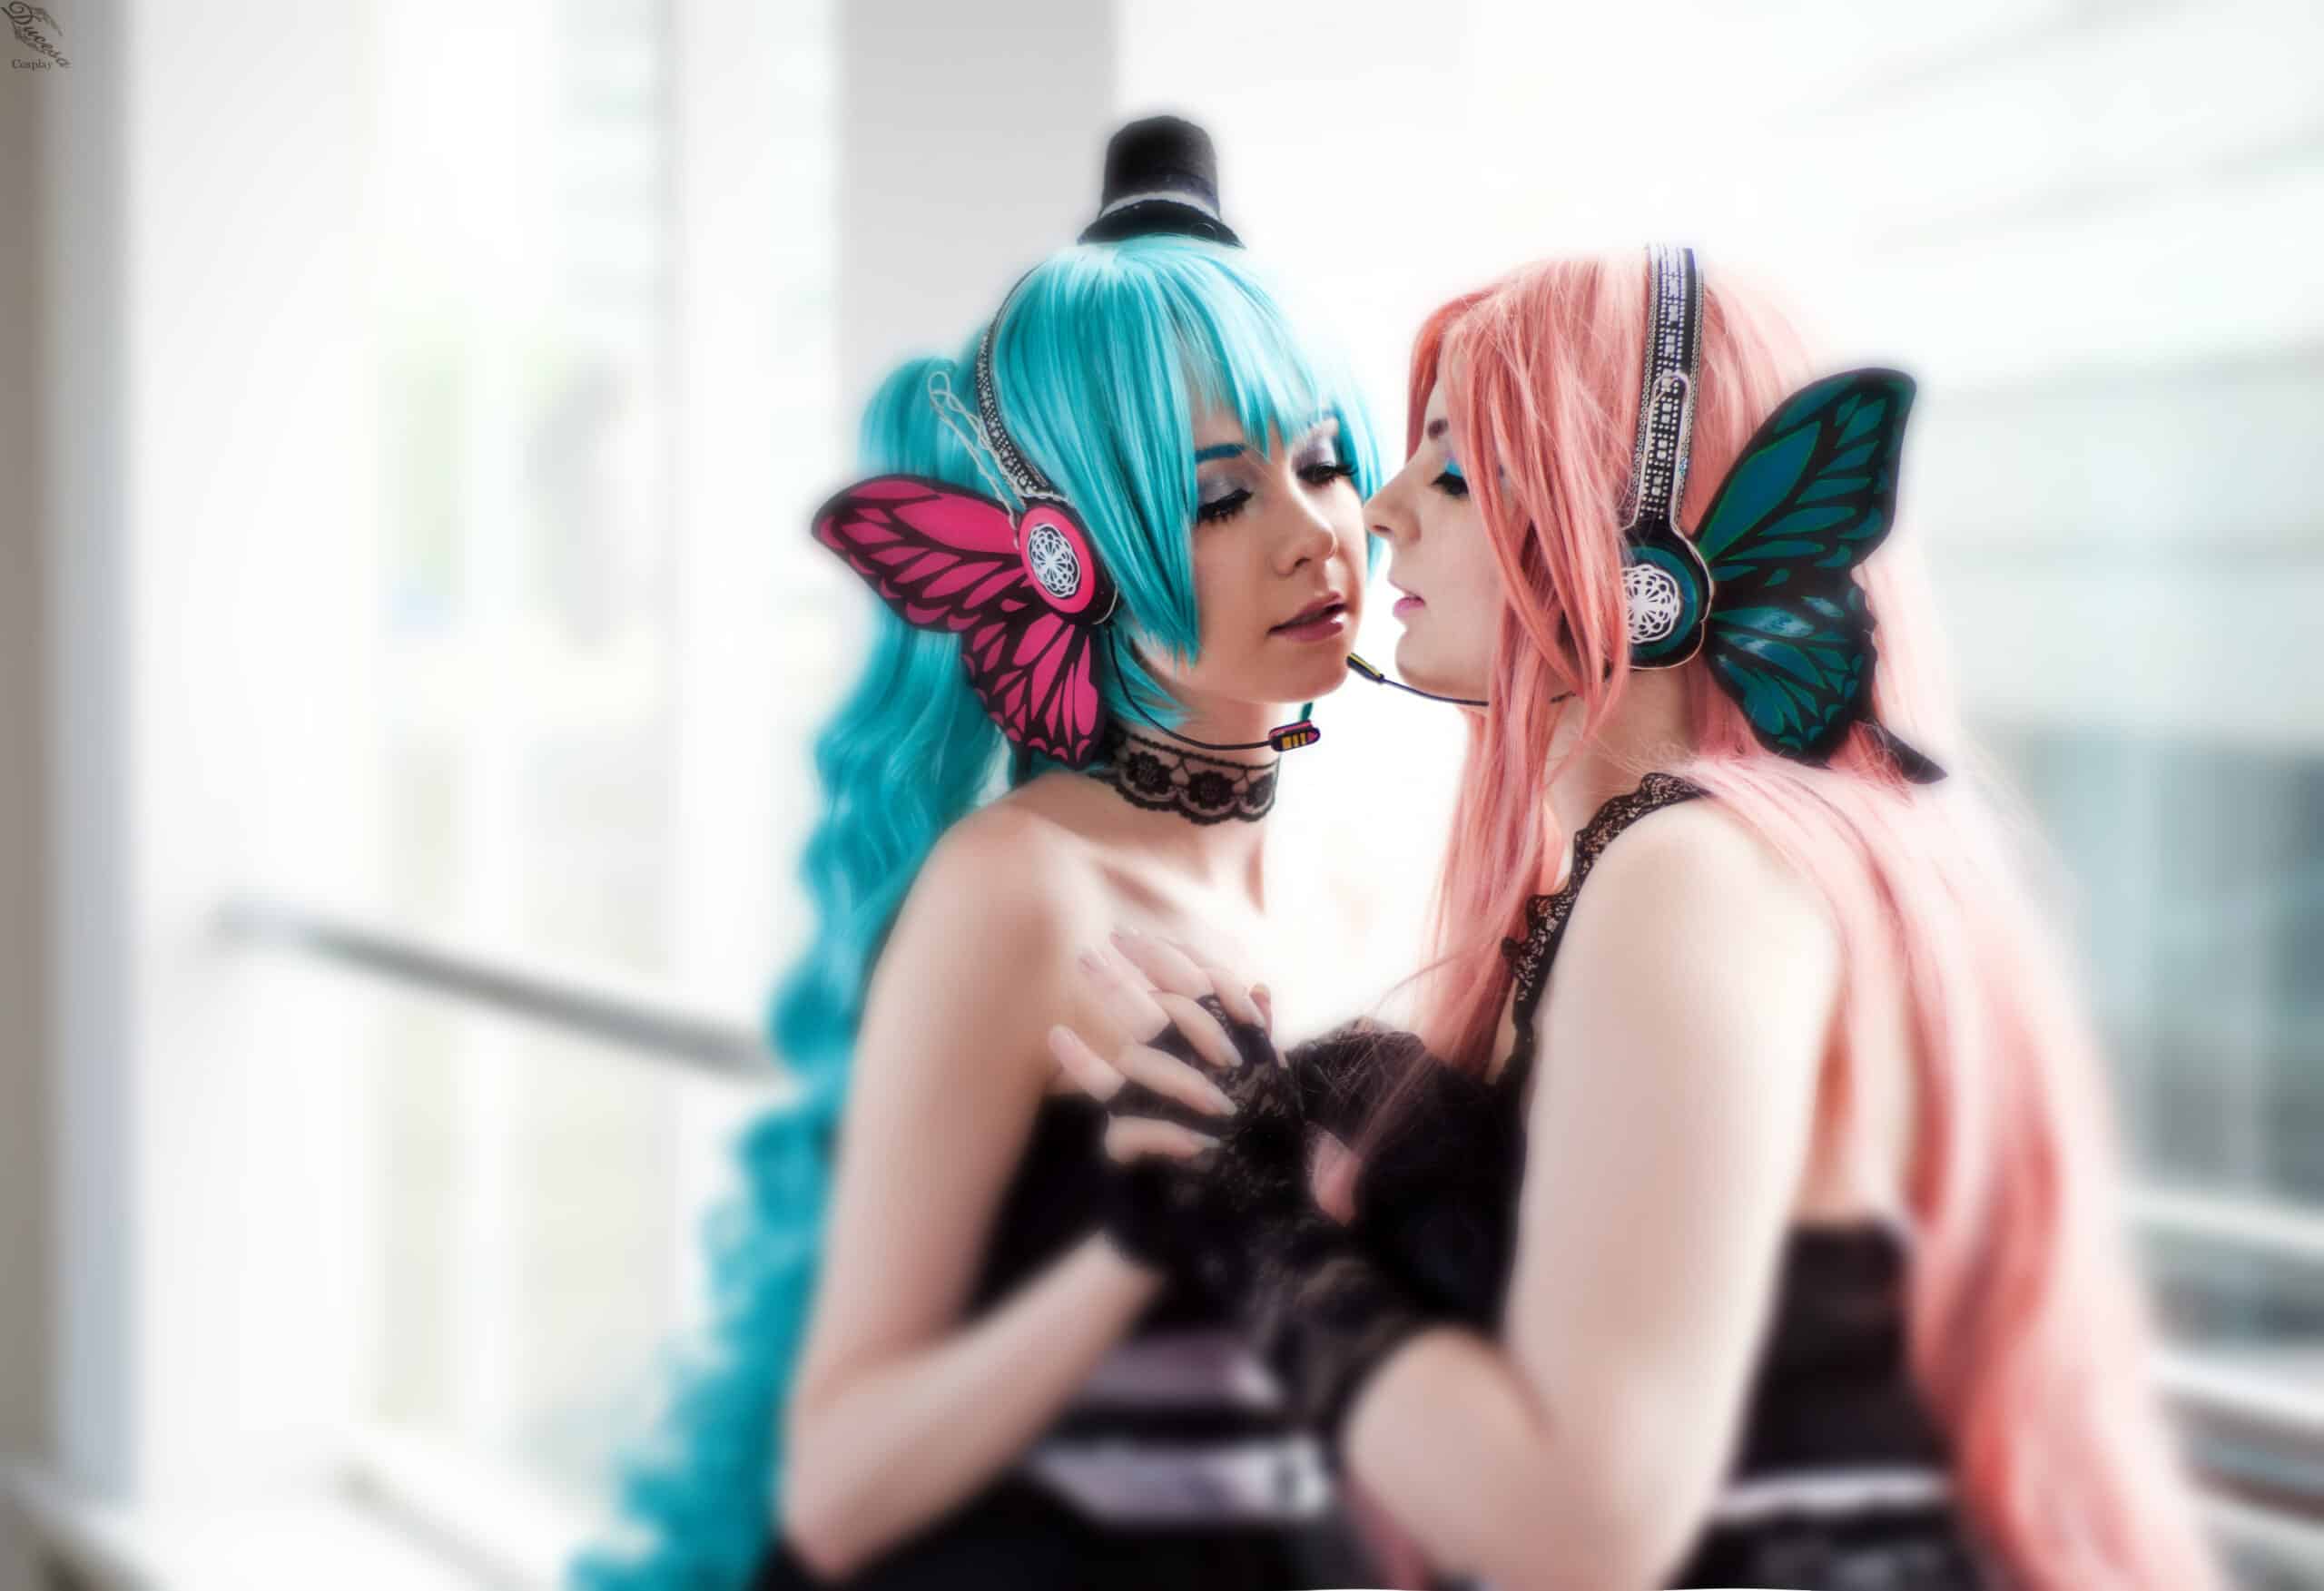 Miku Luka Lesbian Cosplay Love Story Starring DMinorChrystalis and TraumaticCandy by Amaleigh